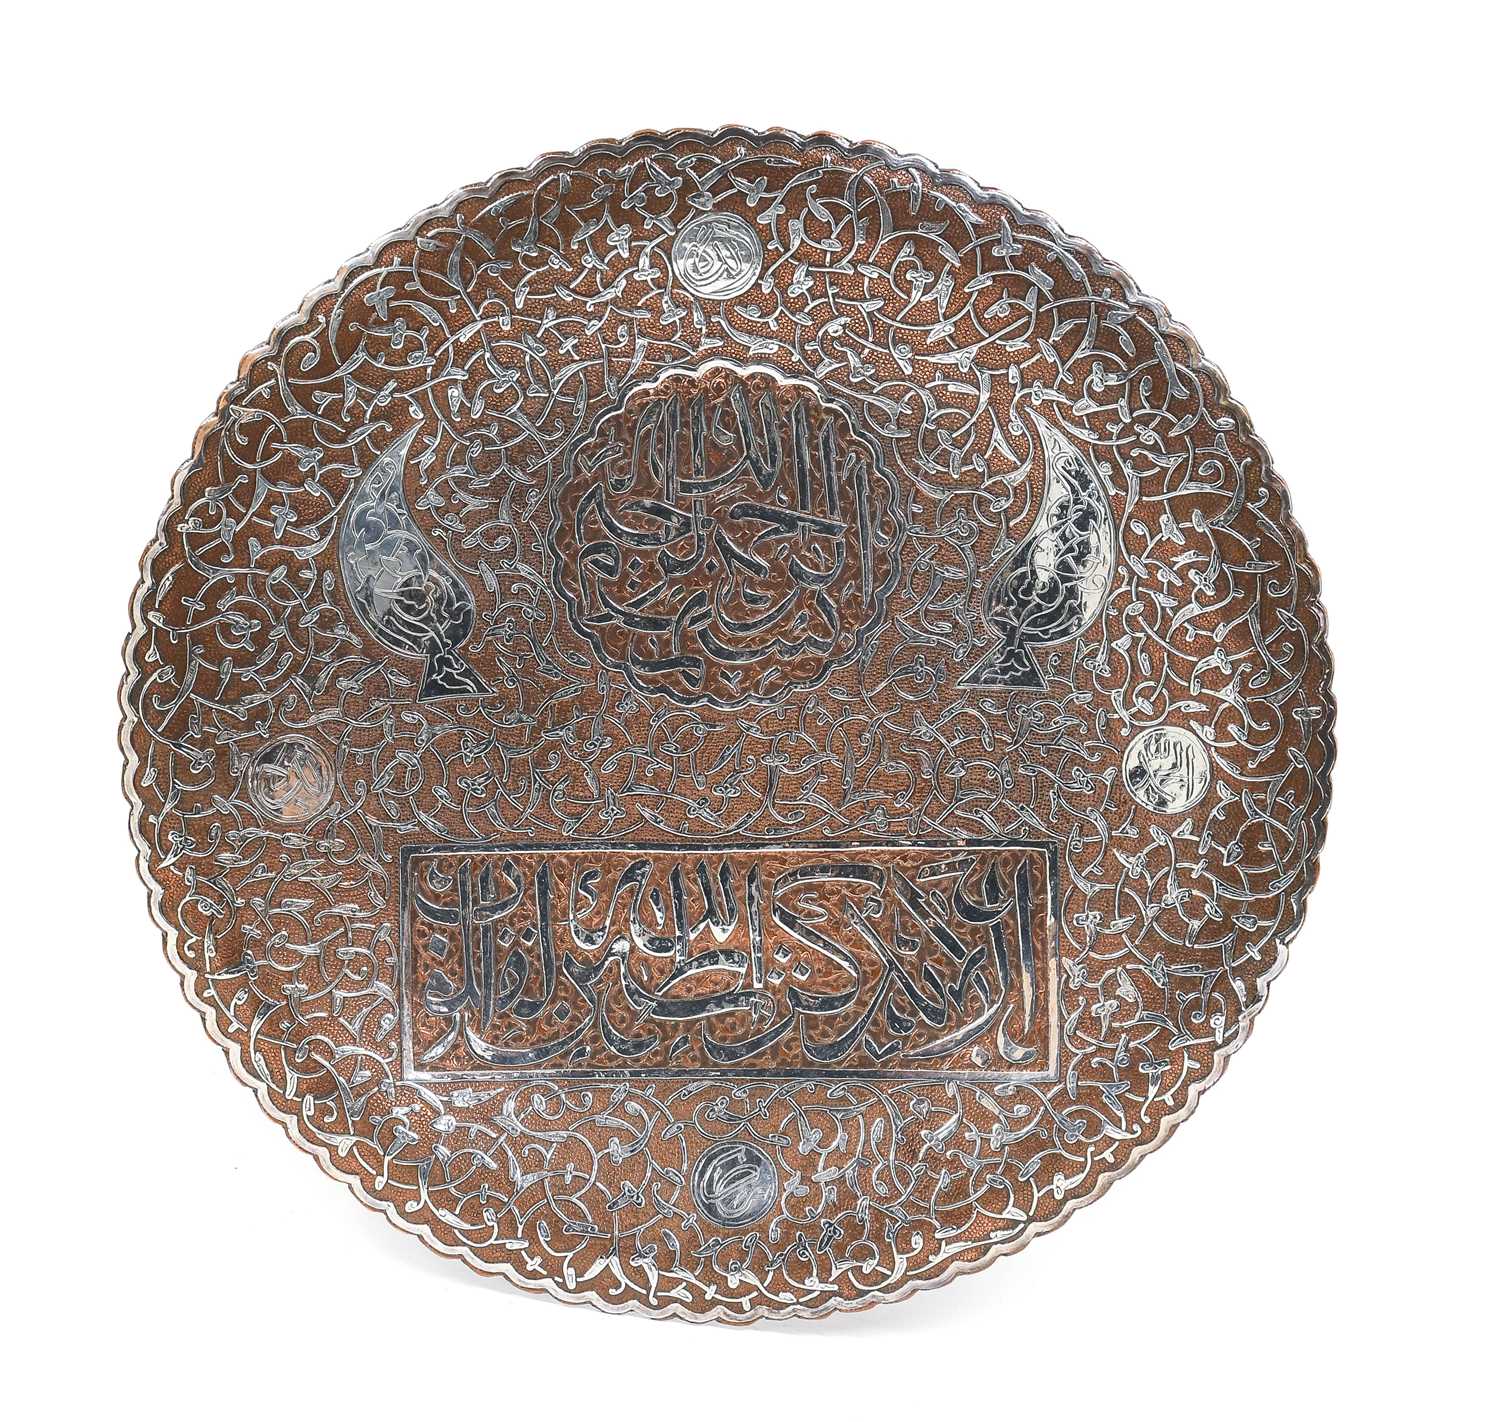 A Cairoware Circular Tray, late 19th/20th century, inlaid in copper and silver with a central - Image 4 of 5